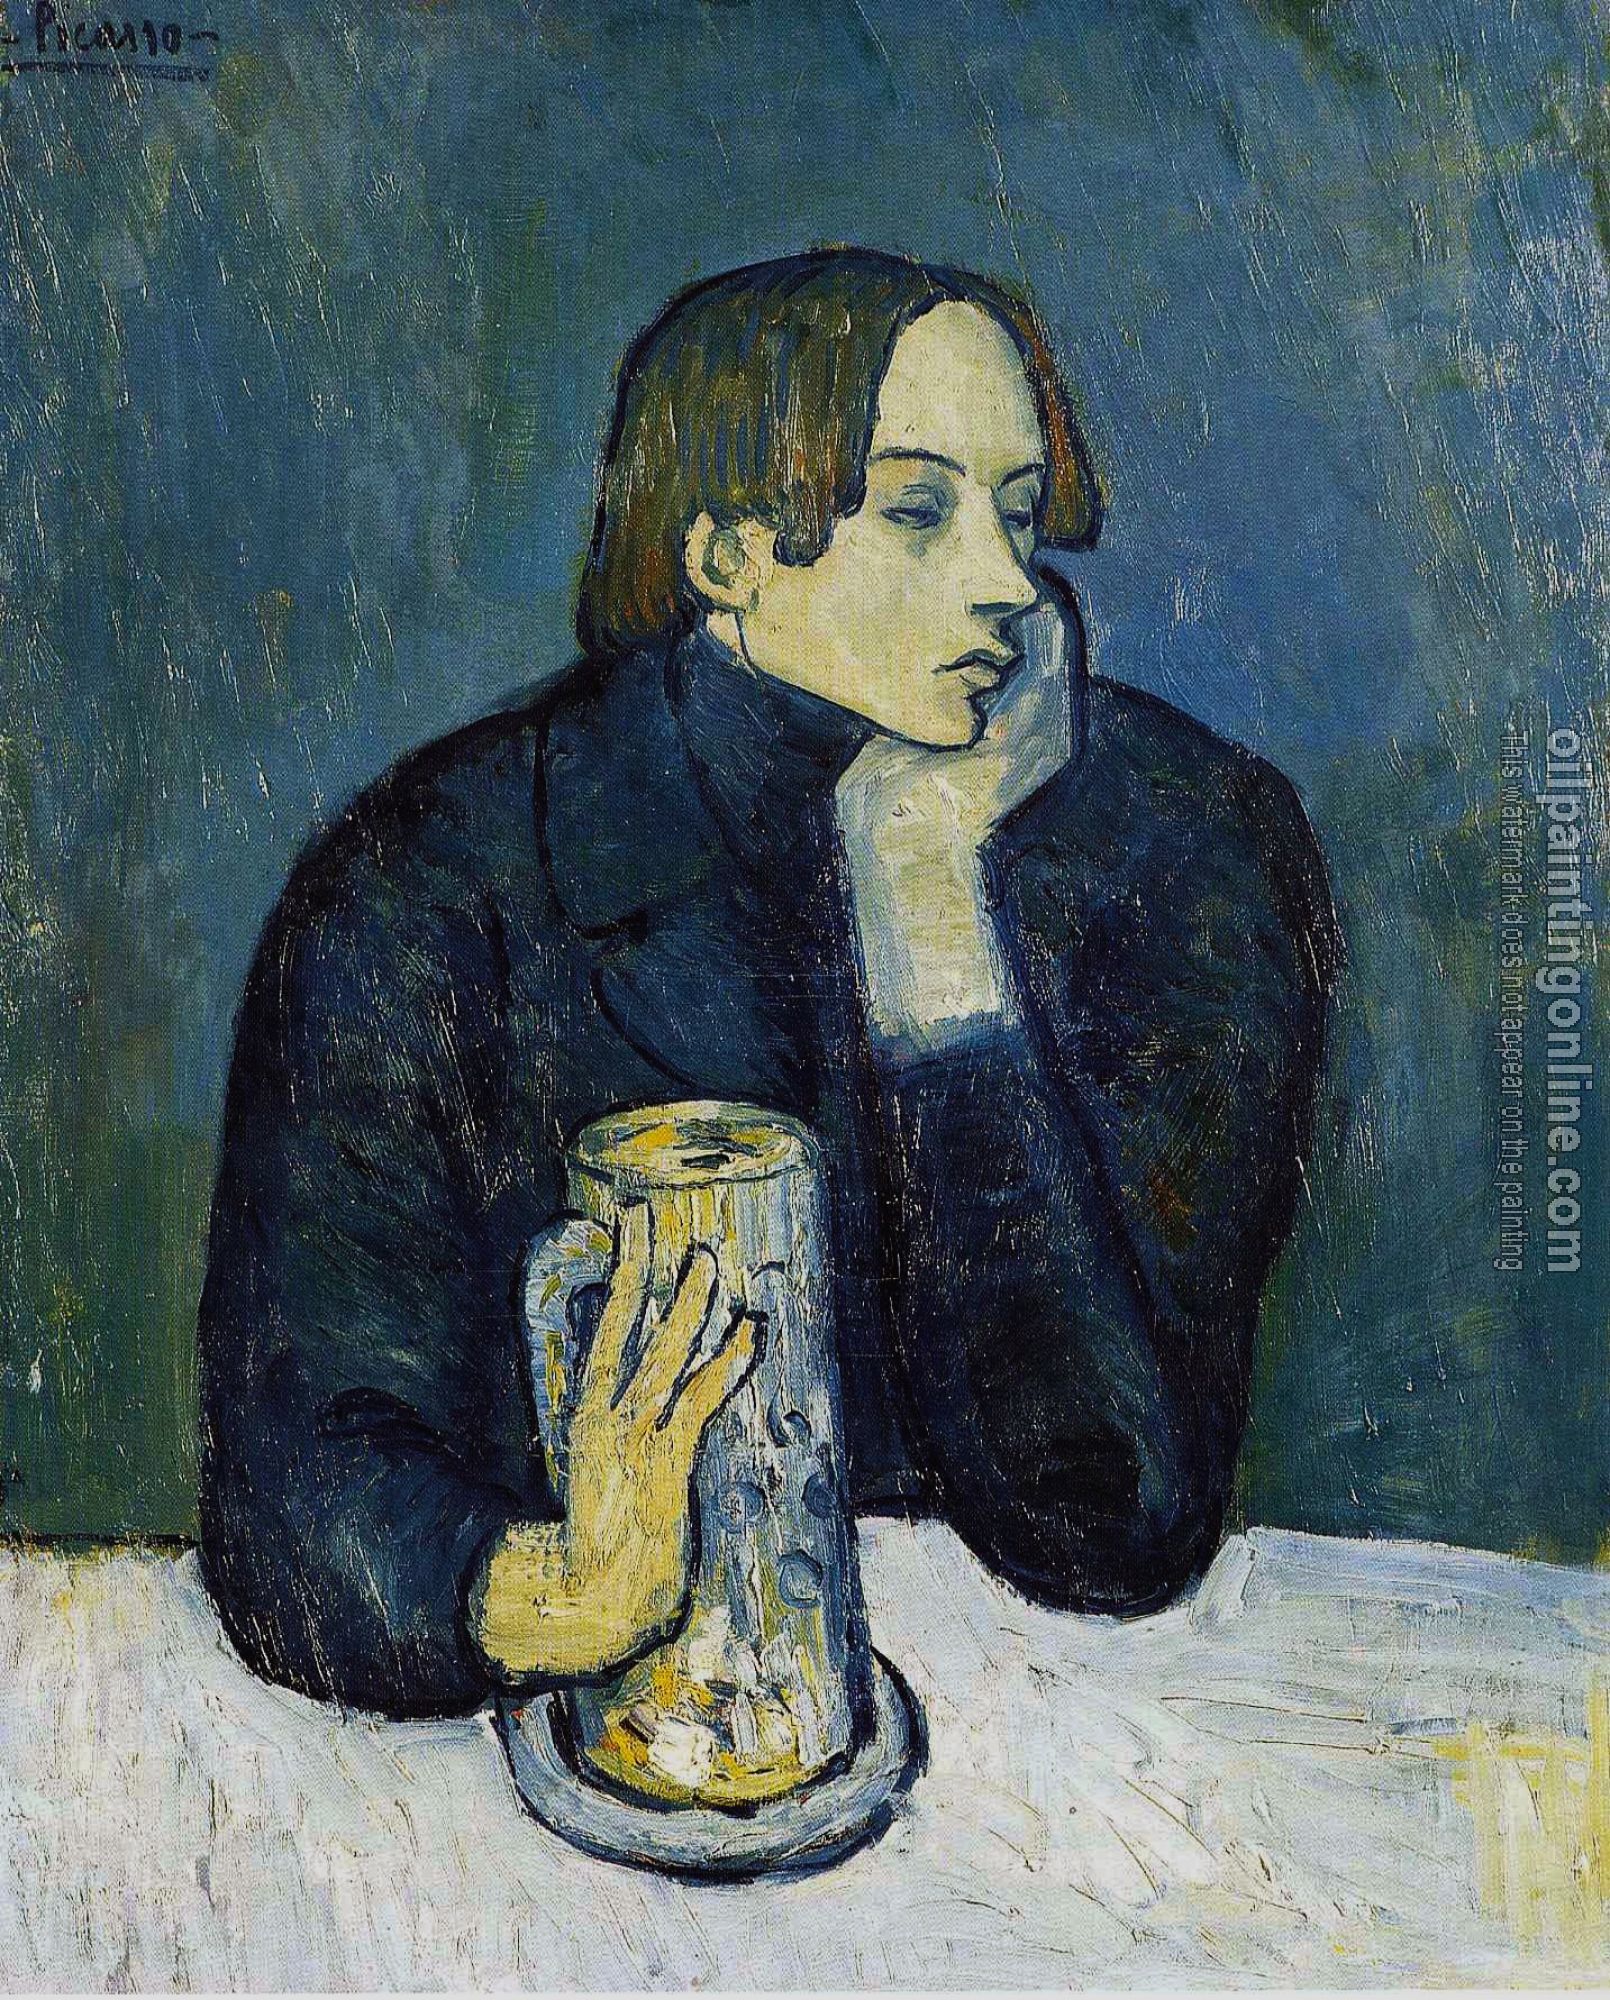 Picasso, Pablo - the glass of beer